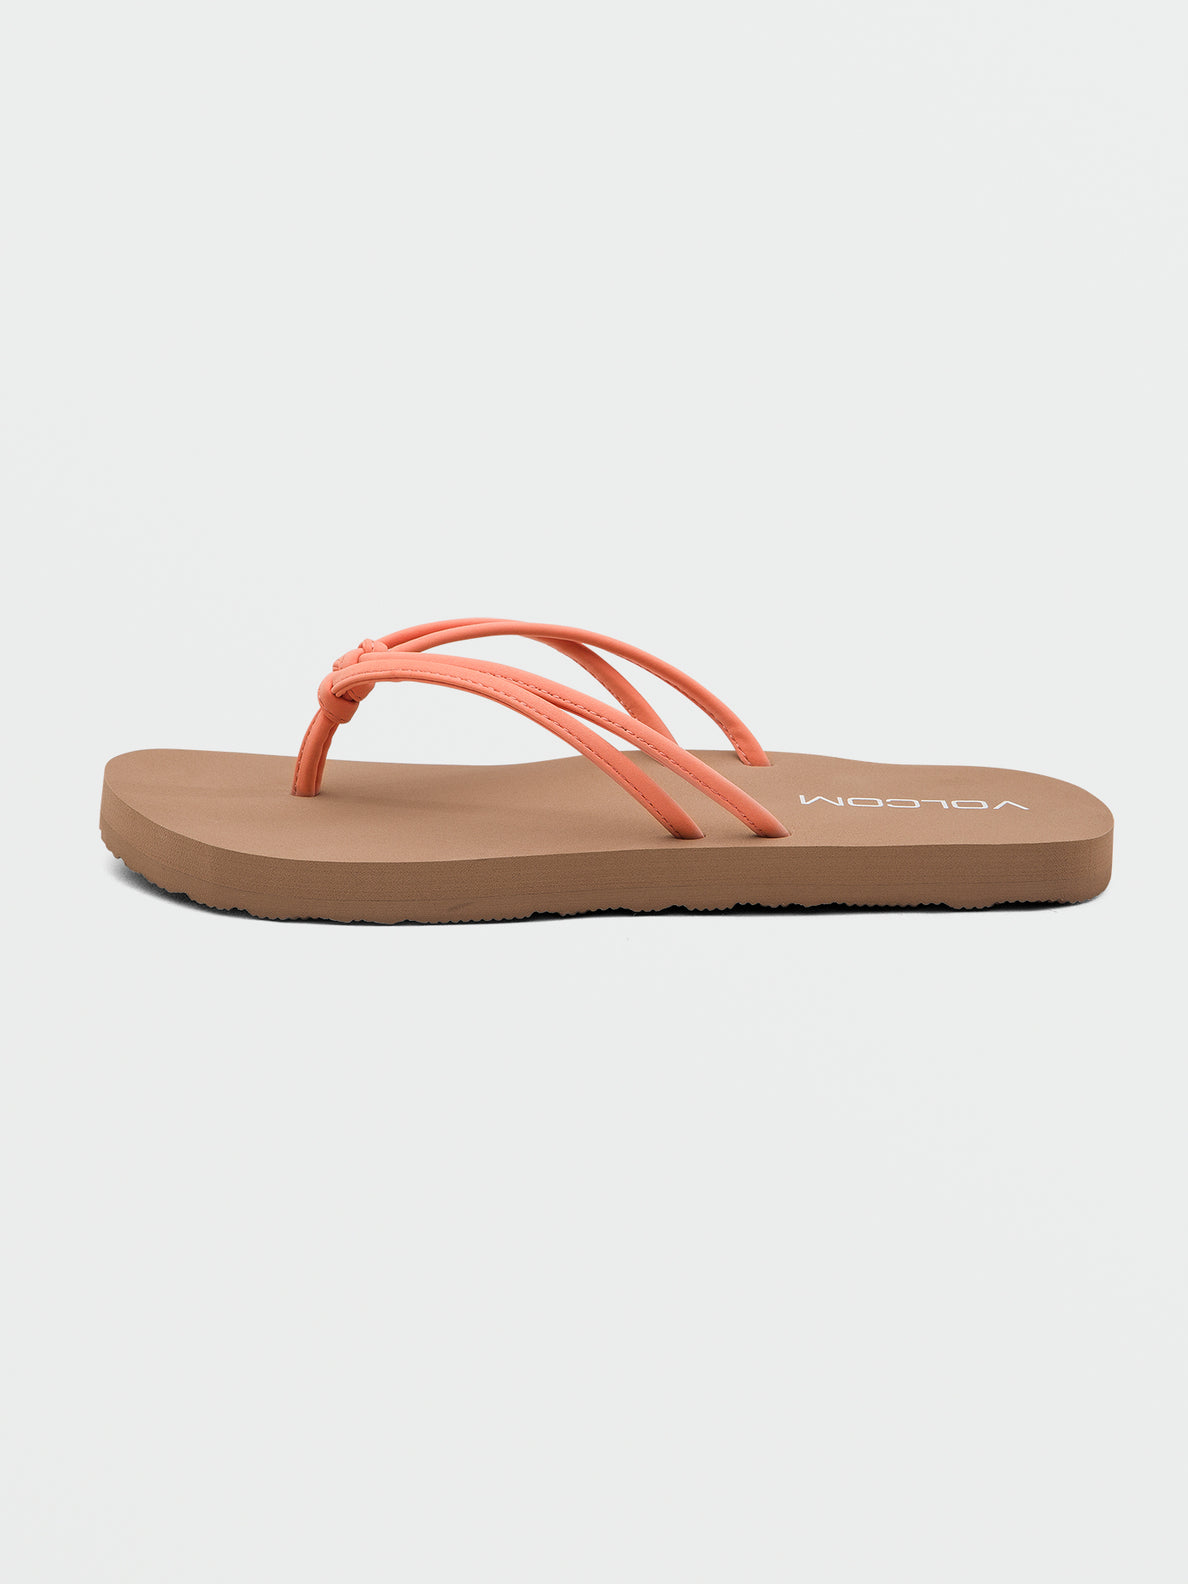 Big Girls Forever And Ever Sandals - Papaya (T0812302_PAY) [1]